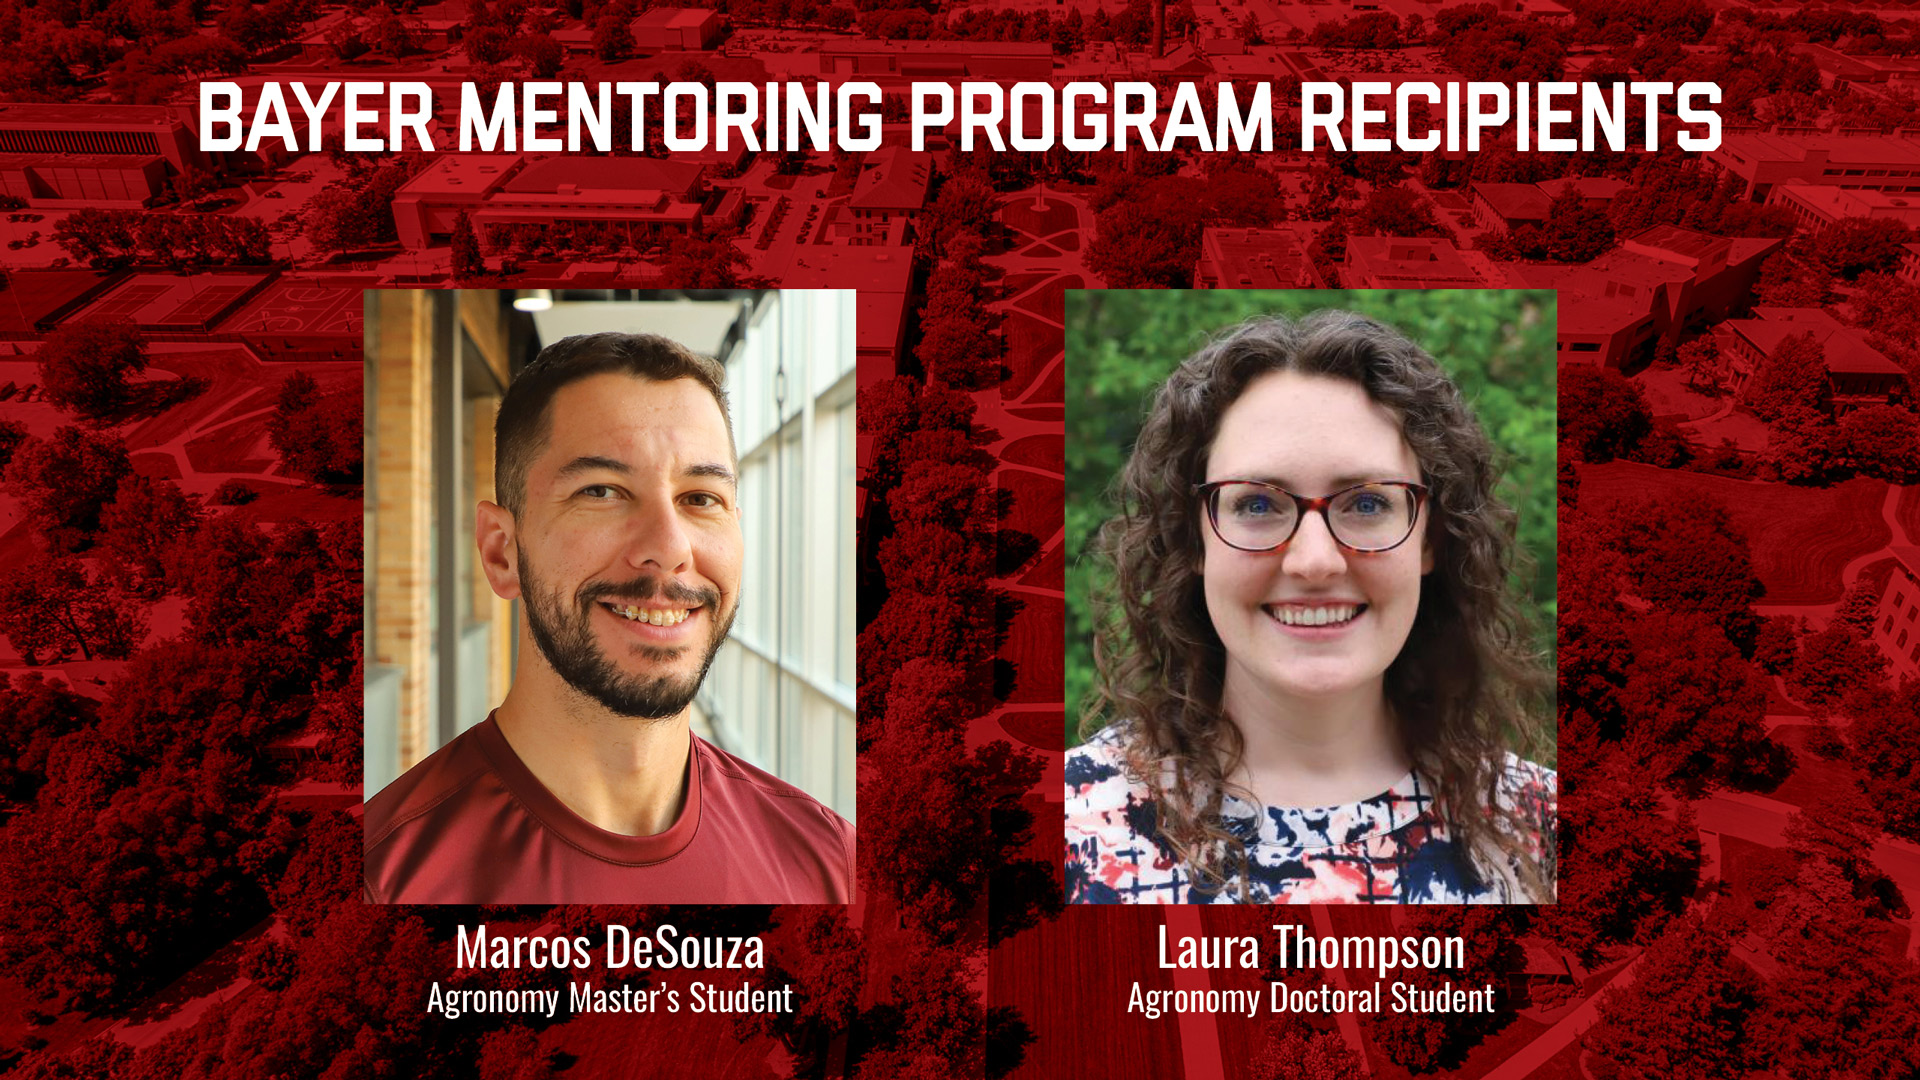 Marcos DeSouza and Laura Thompson selected for Bayer Mentoring Program.